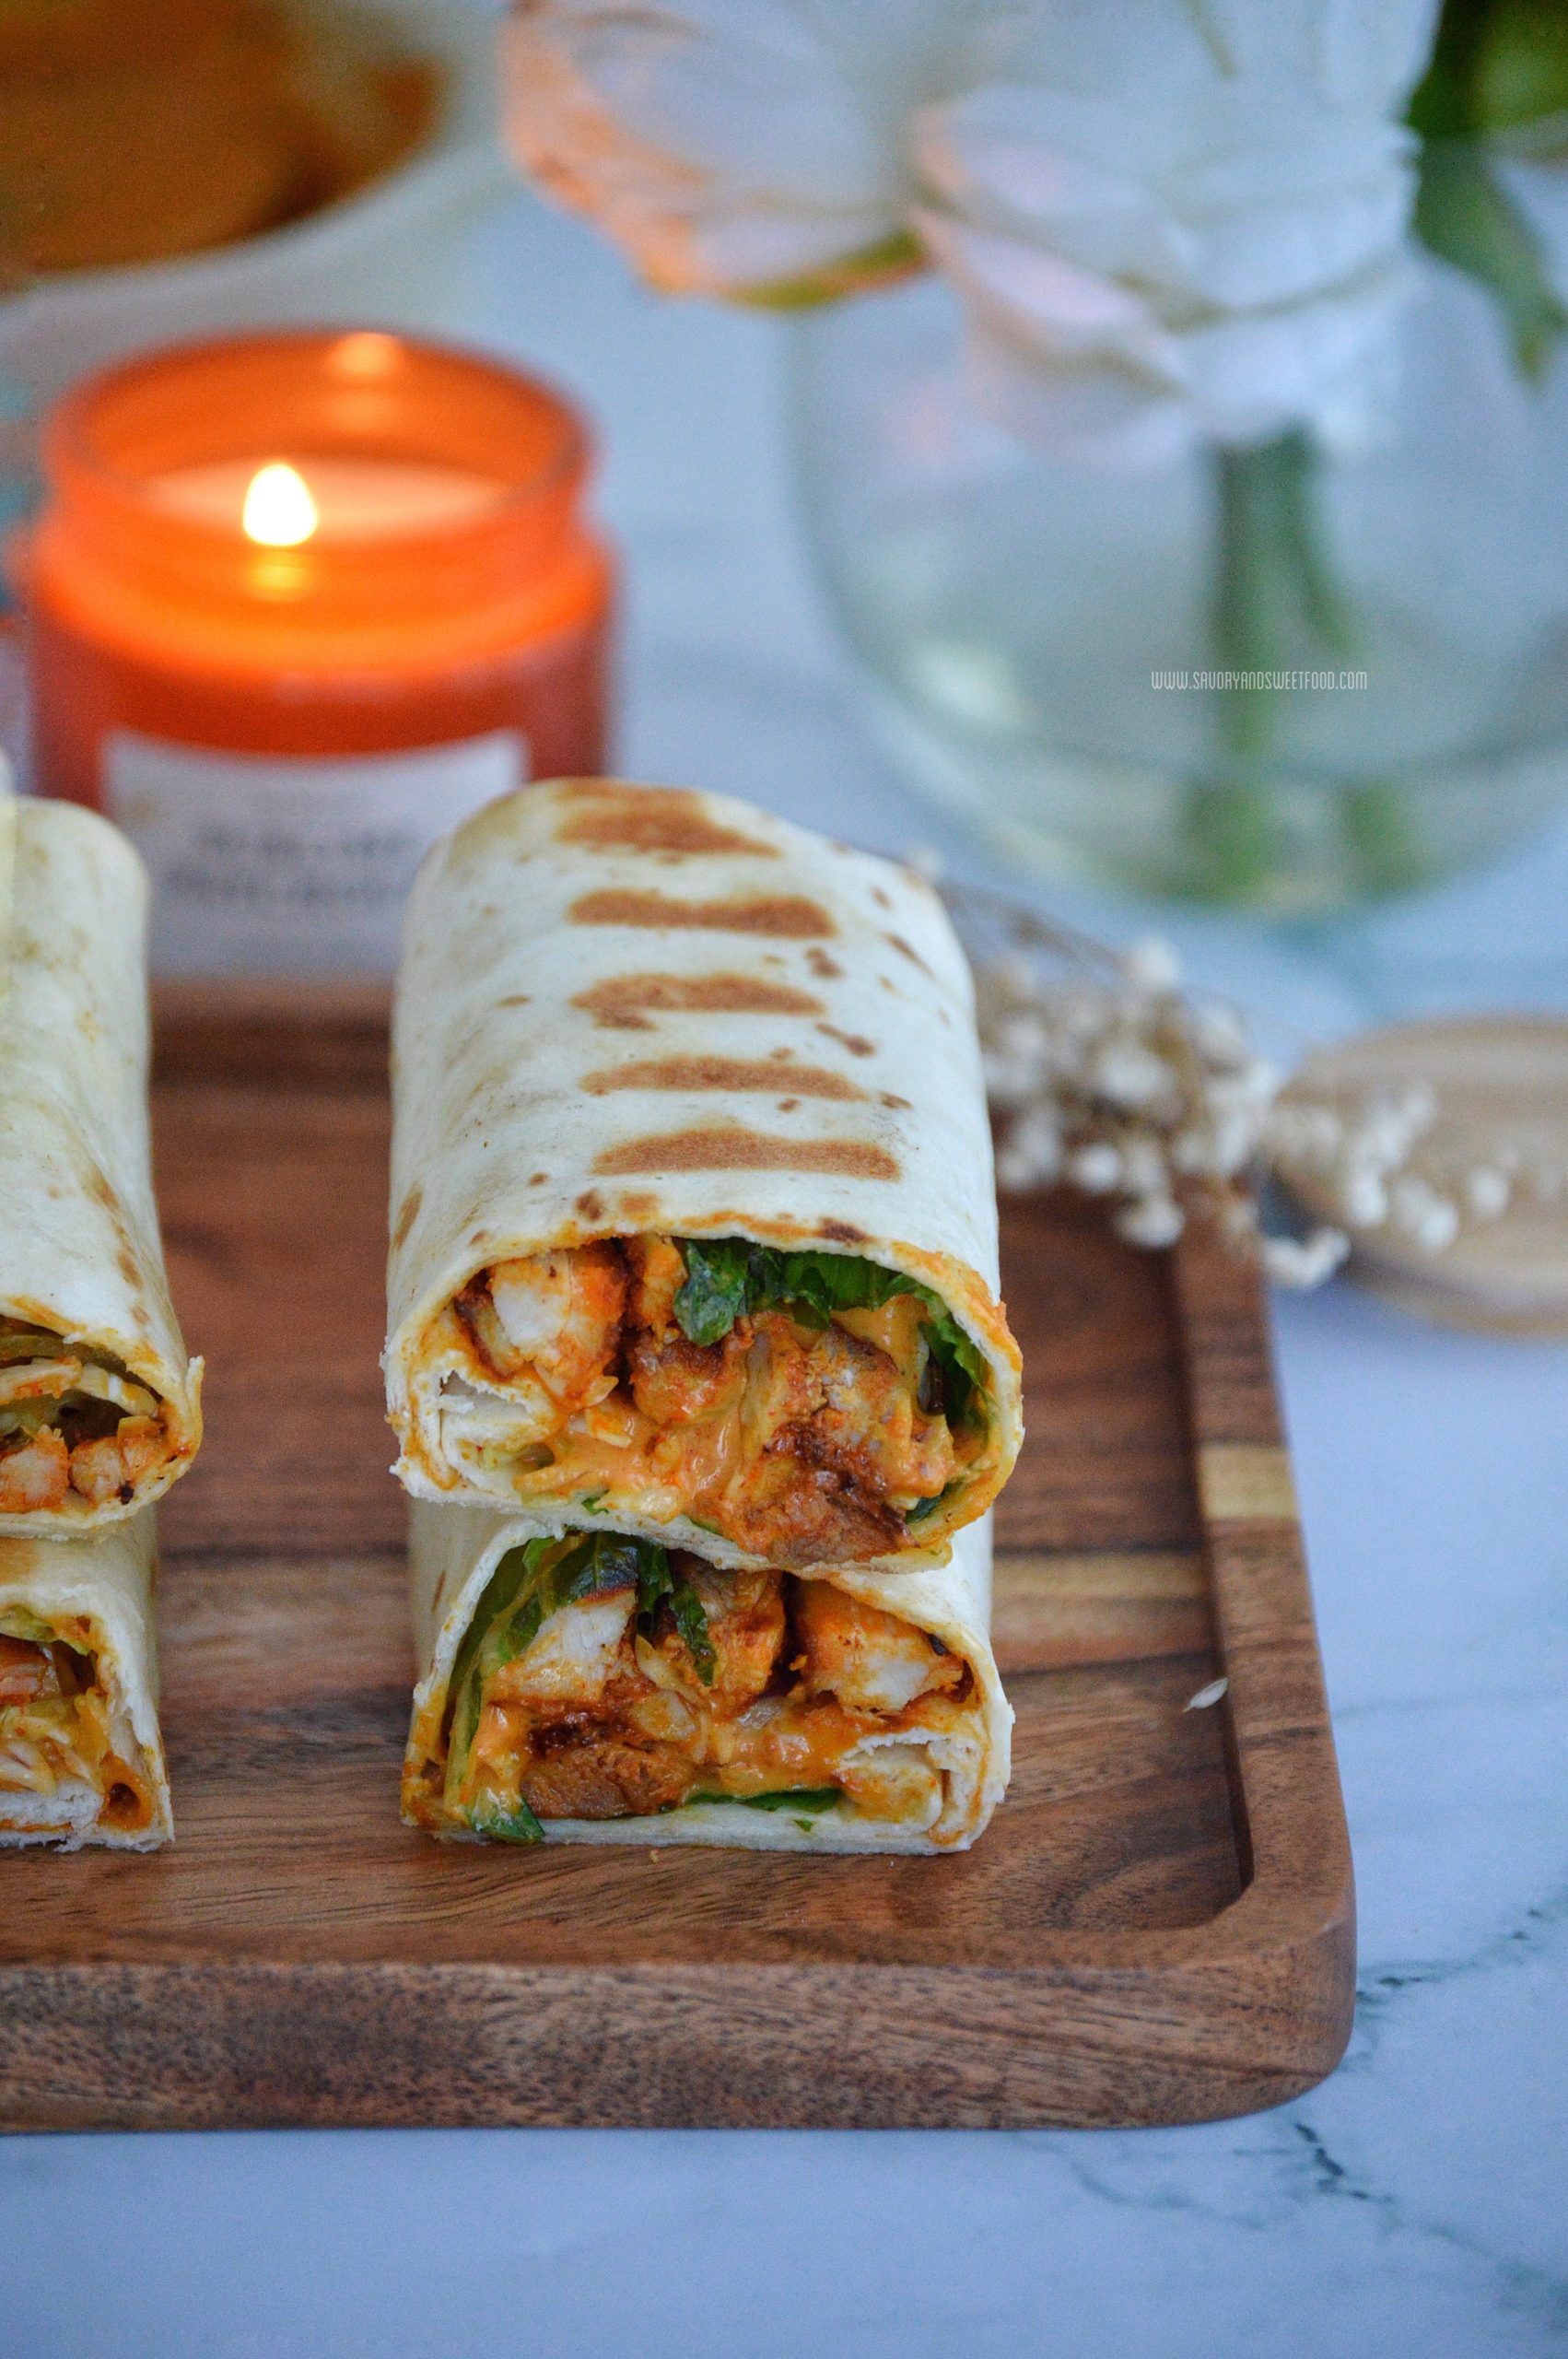 Chicken Kebab Wraps with Special Spicy Sauce - Savory&SweetFood